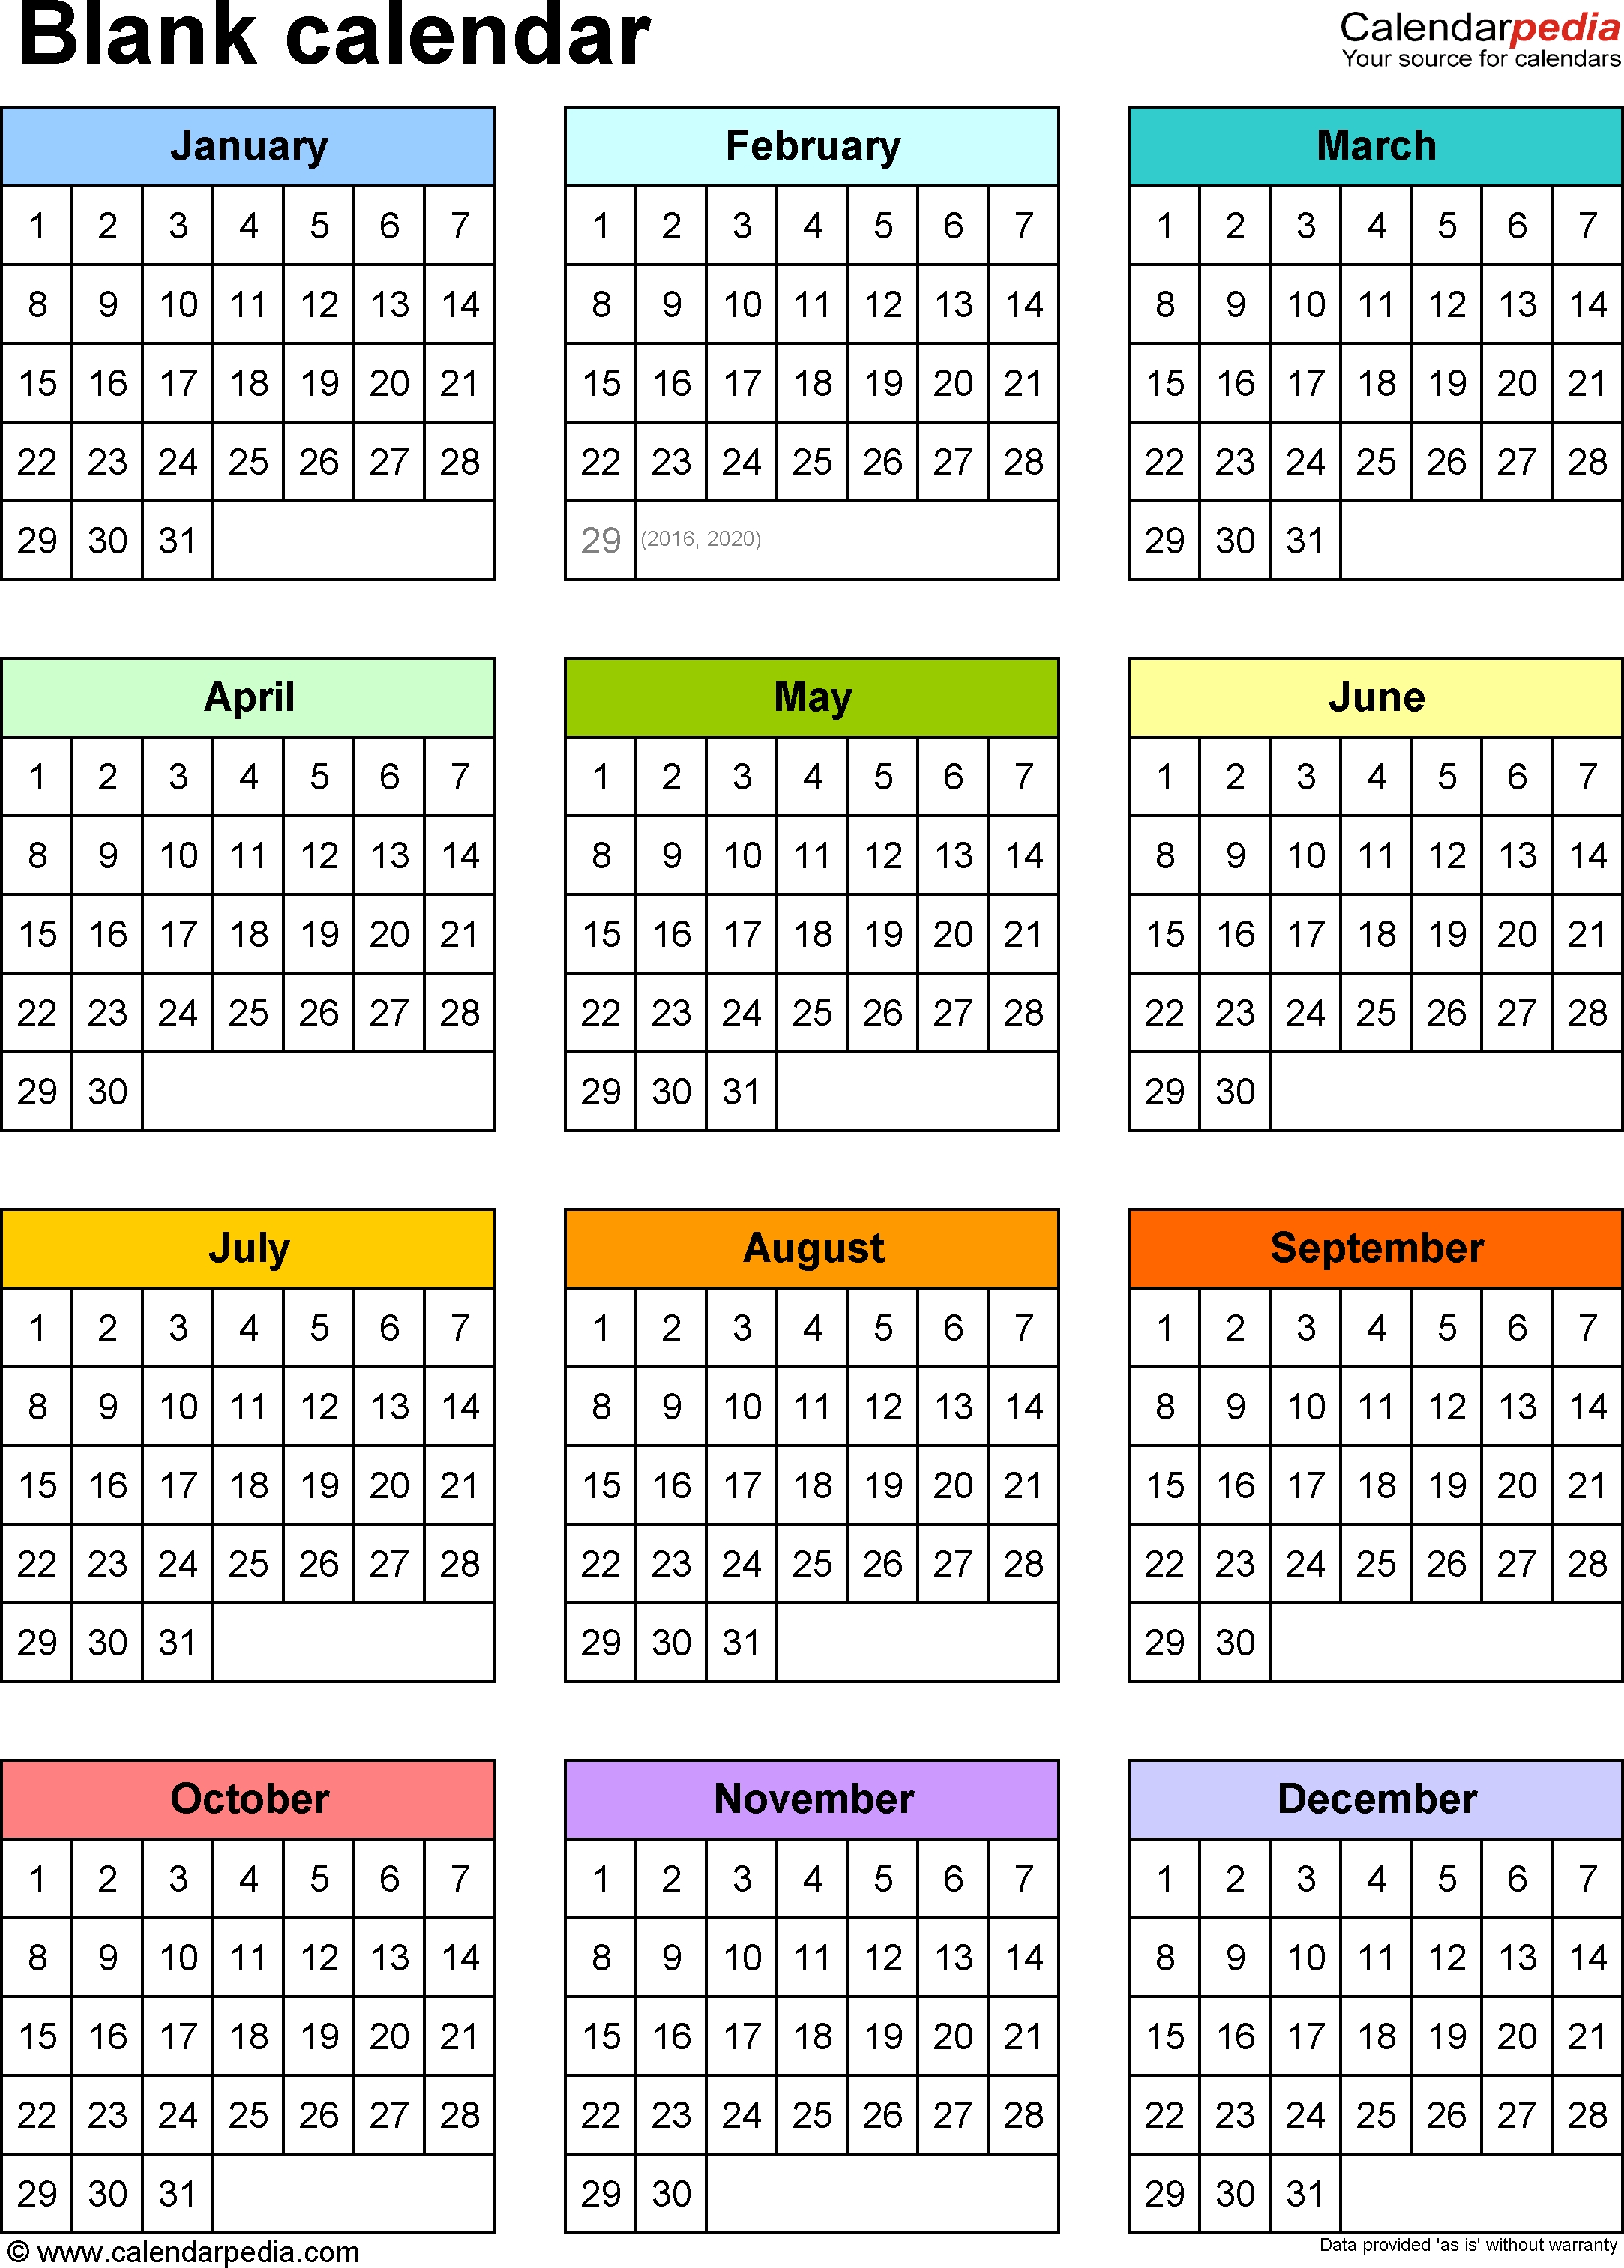 Blank Calendar - 9 Free Printable Microsoft Word Templates for Template For Calendar With 12 Months On One Page